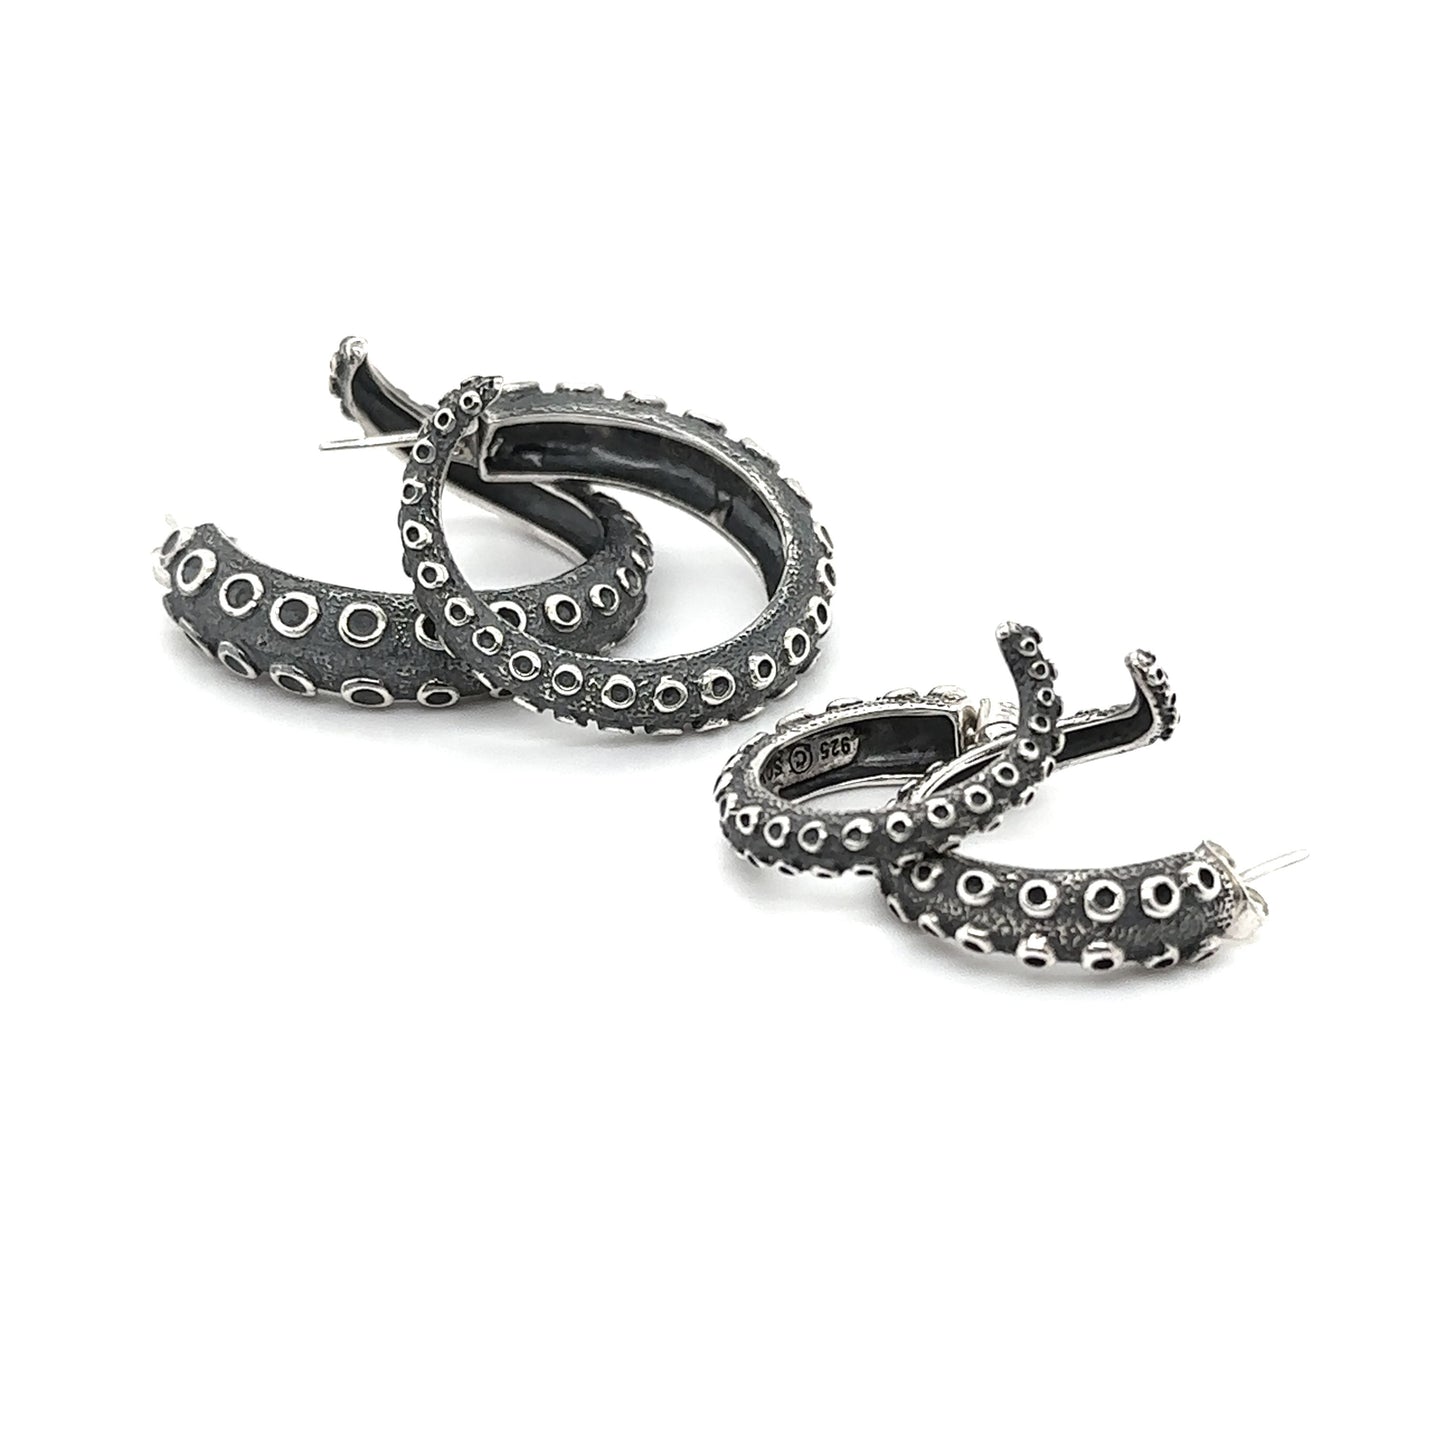 A pair of Super Silver Edgy Octopus Tentacle Hoop Earrings on a white background.